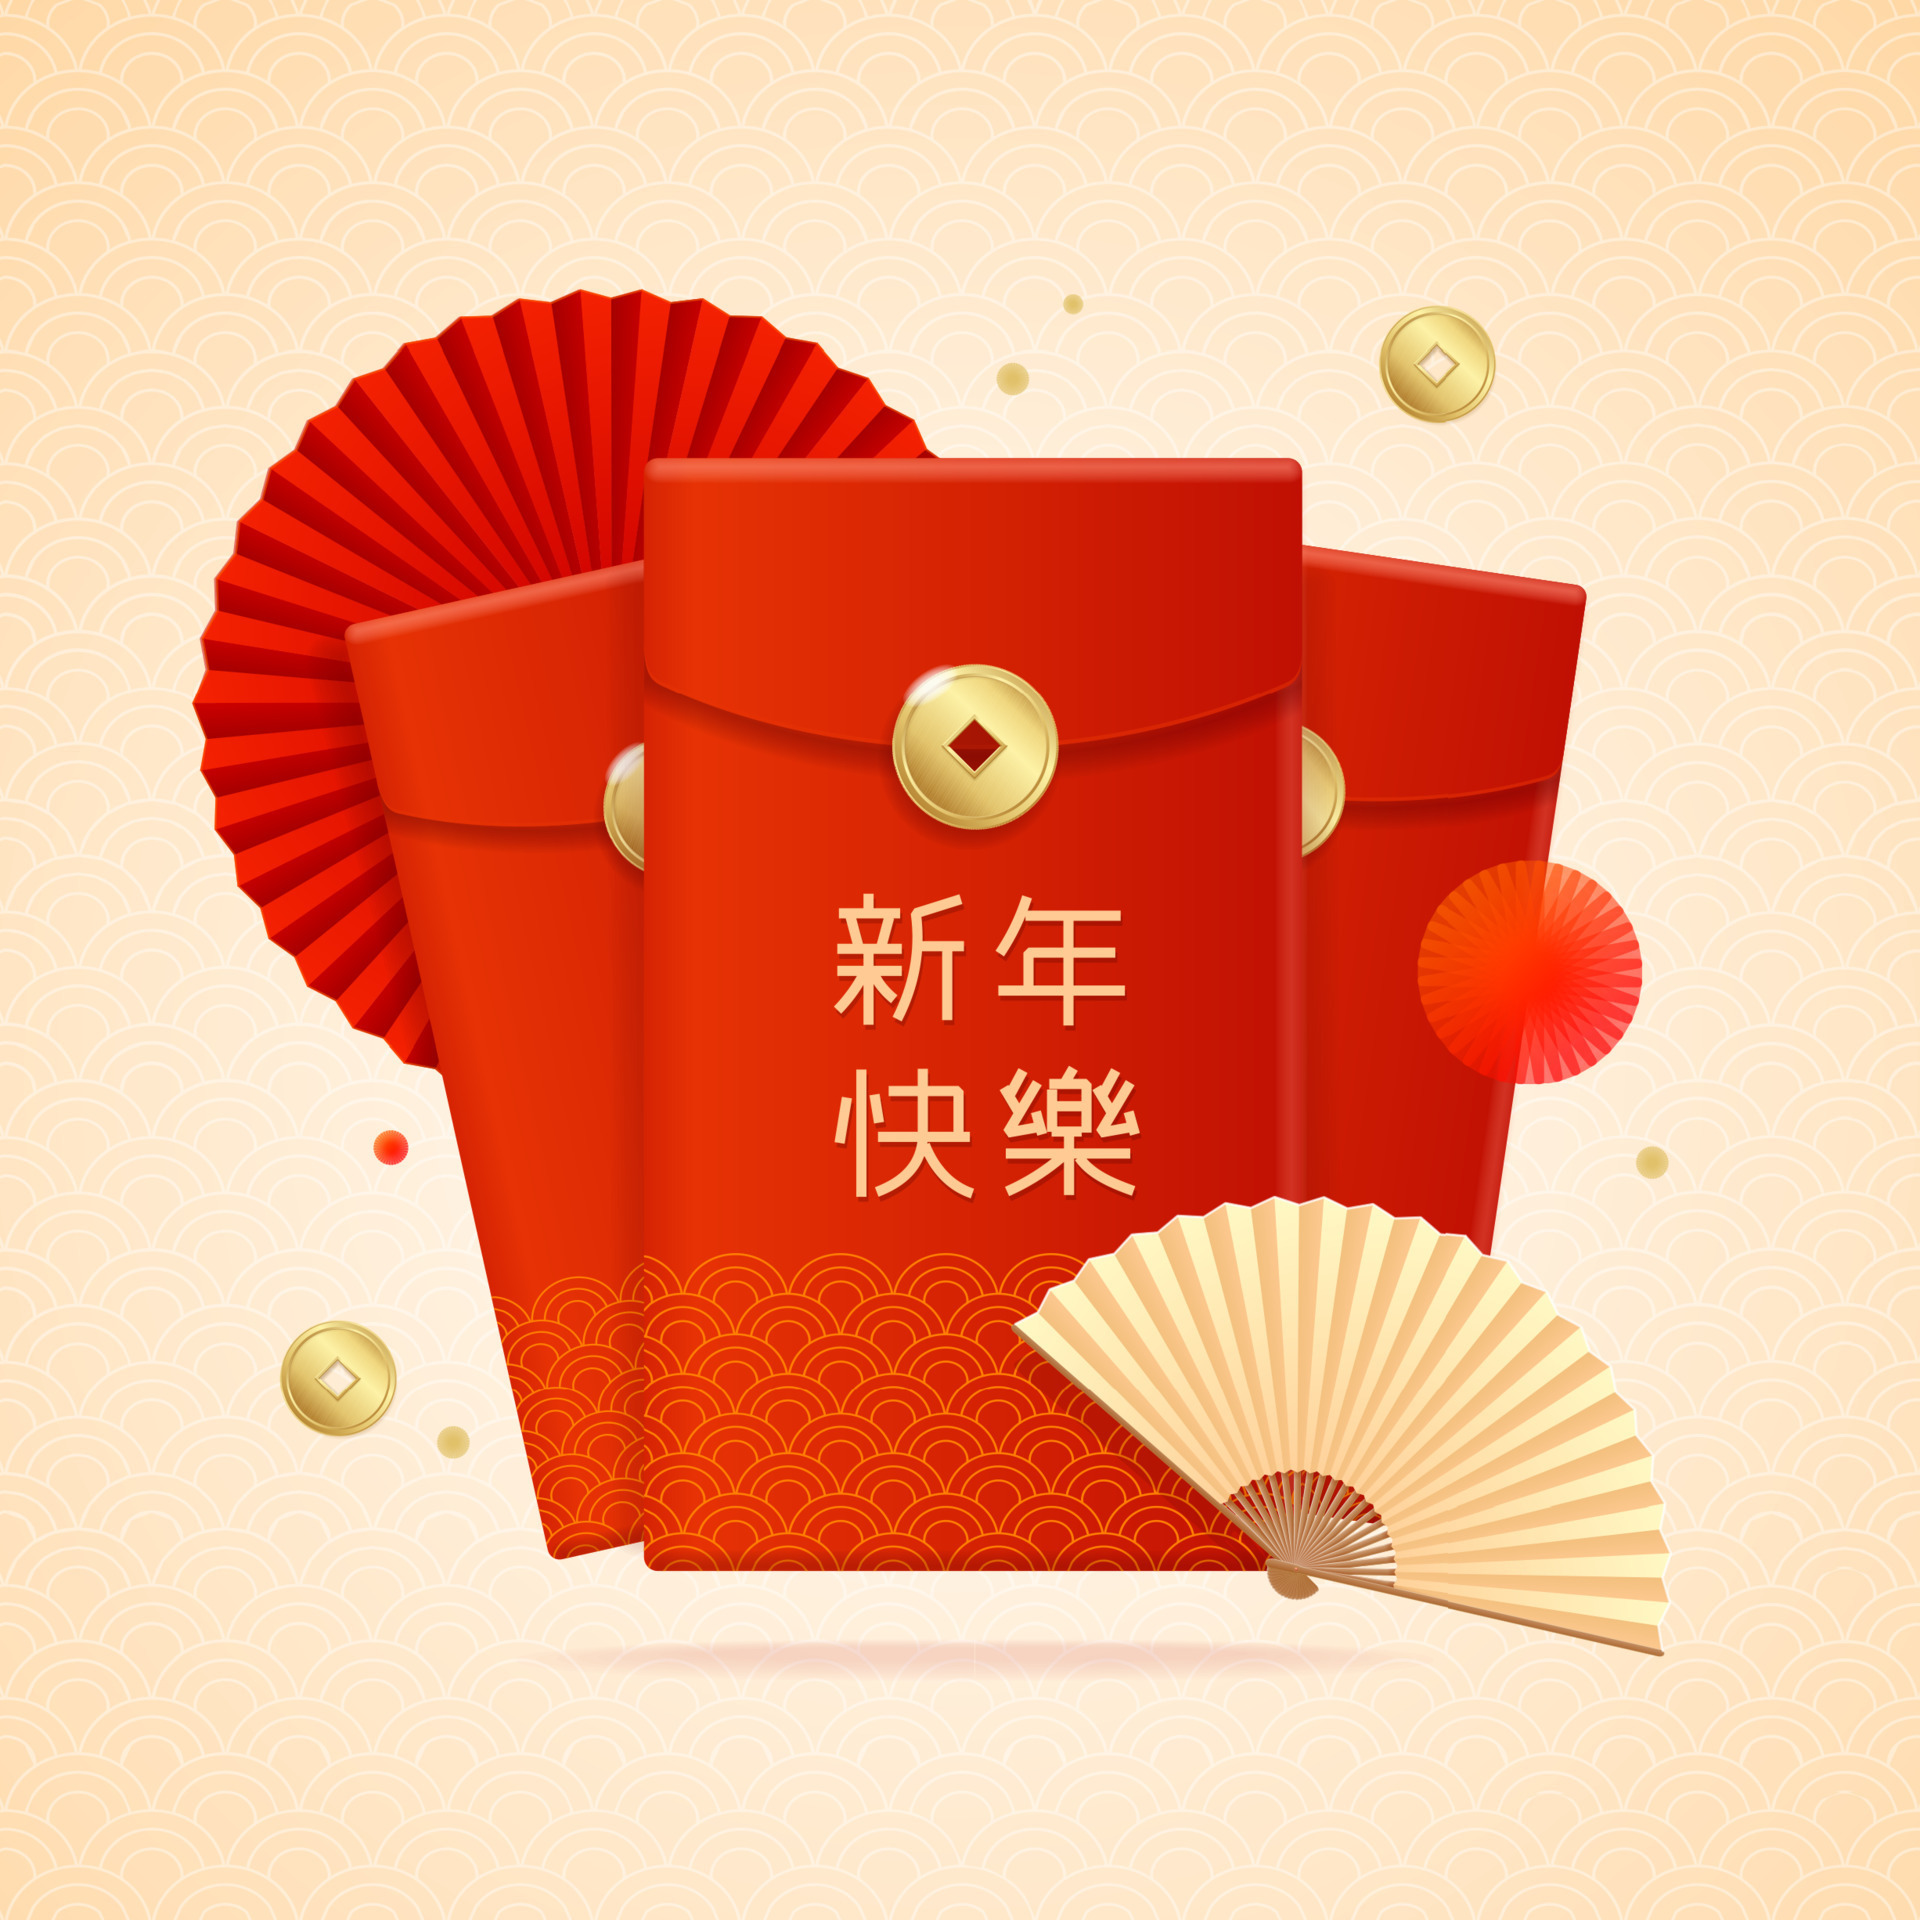 1,362 Red Envelope Dog Images, Stock Photos, 3D objects, & Vectors